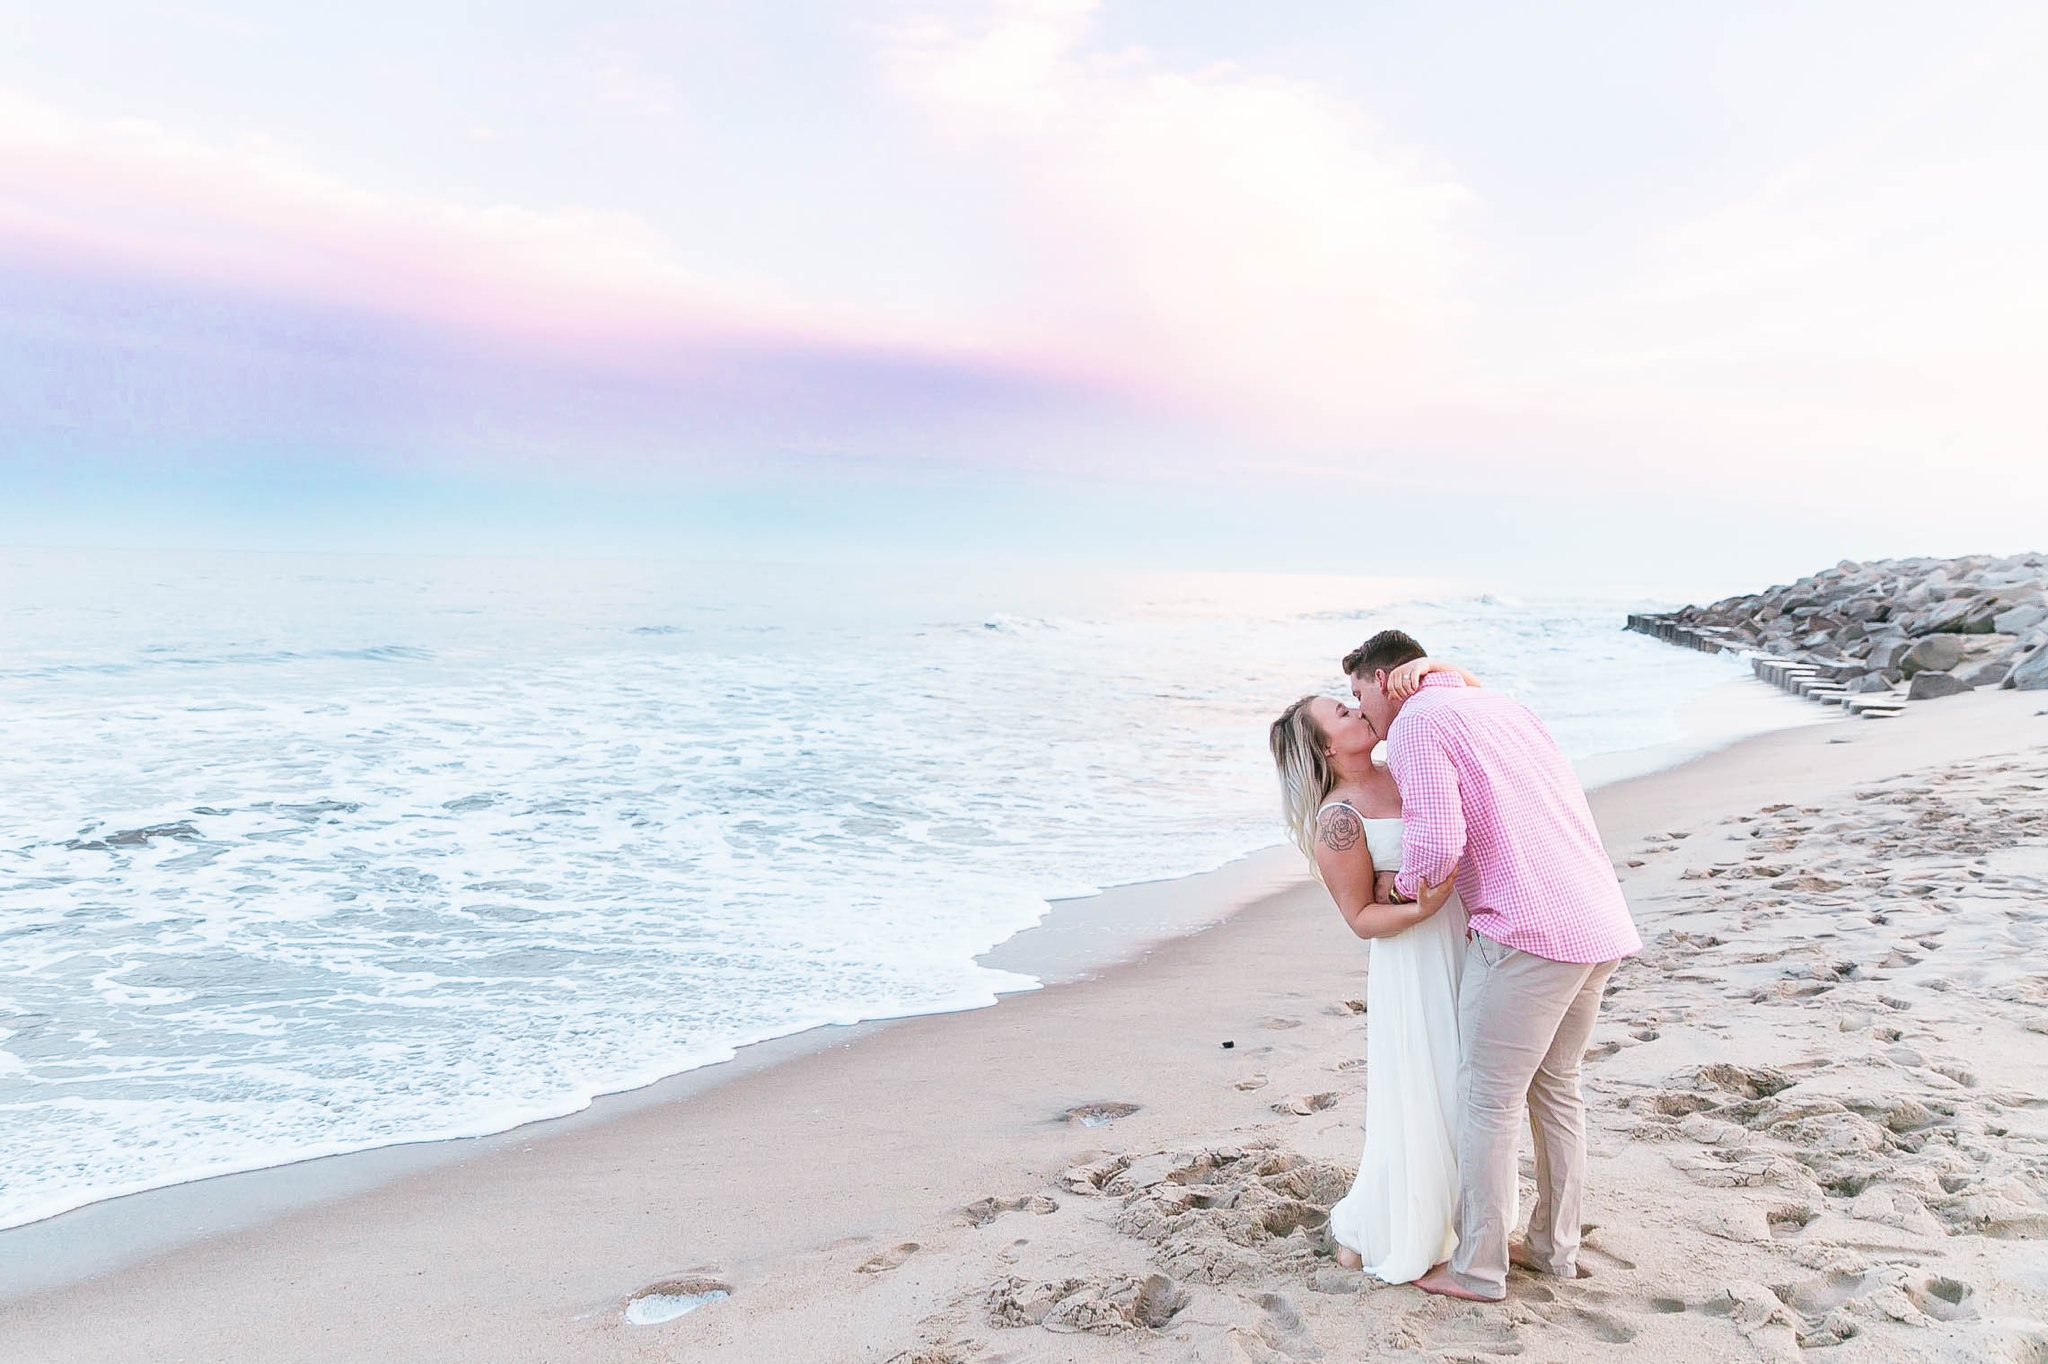  Romantic Engagement Photography Session at the beach during sunset with a cotton candy sky - guy is kissing his fiance - girl is wearing a white flowy maxi dress from lulus - Honolulu Oahu Hawaii Wedding Photographer - Johanna Dye 